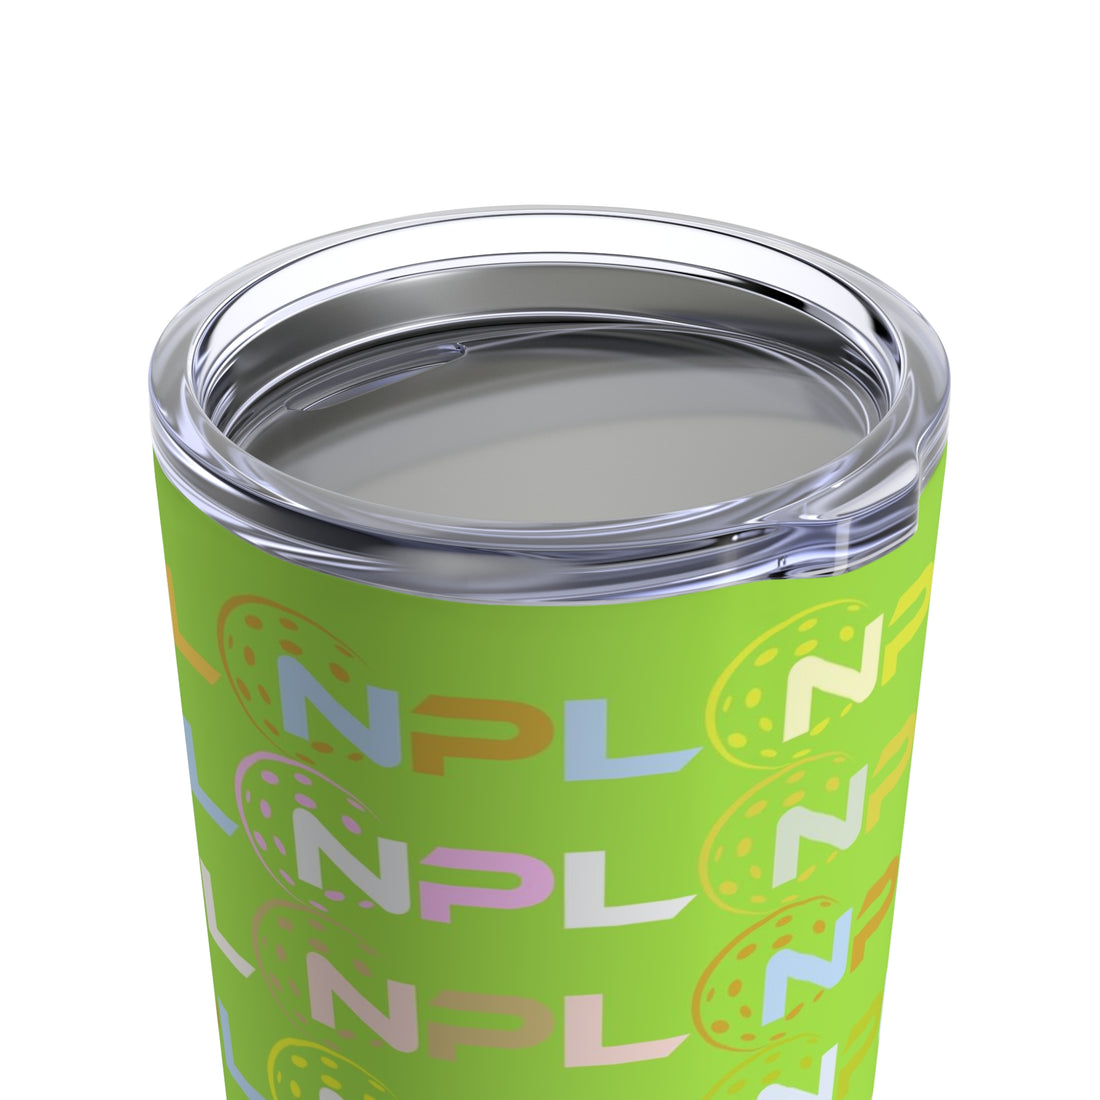 OKC Punishers™ Green a6e441 NPL™ Tumbler – Sip in Style with Team Spirit!